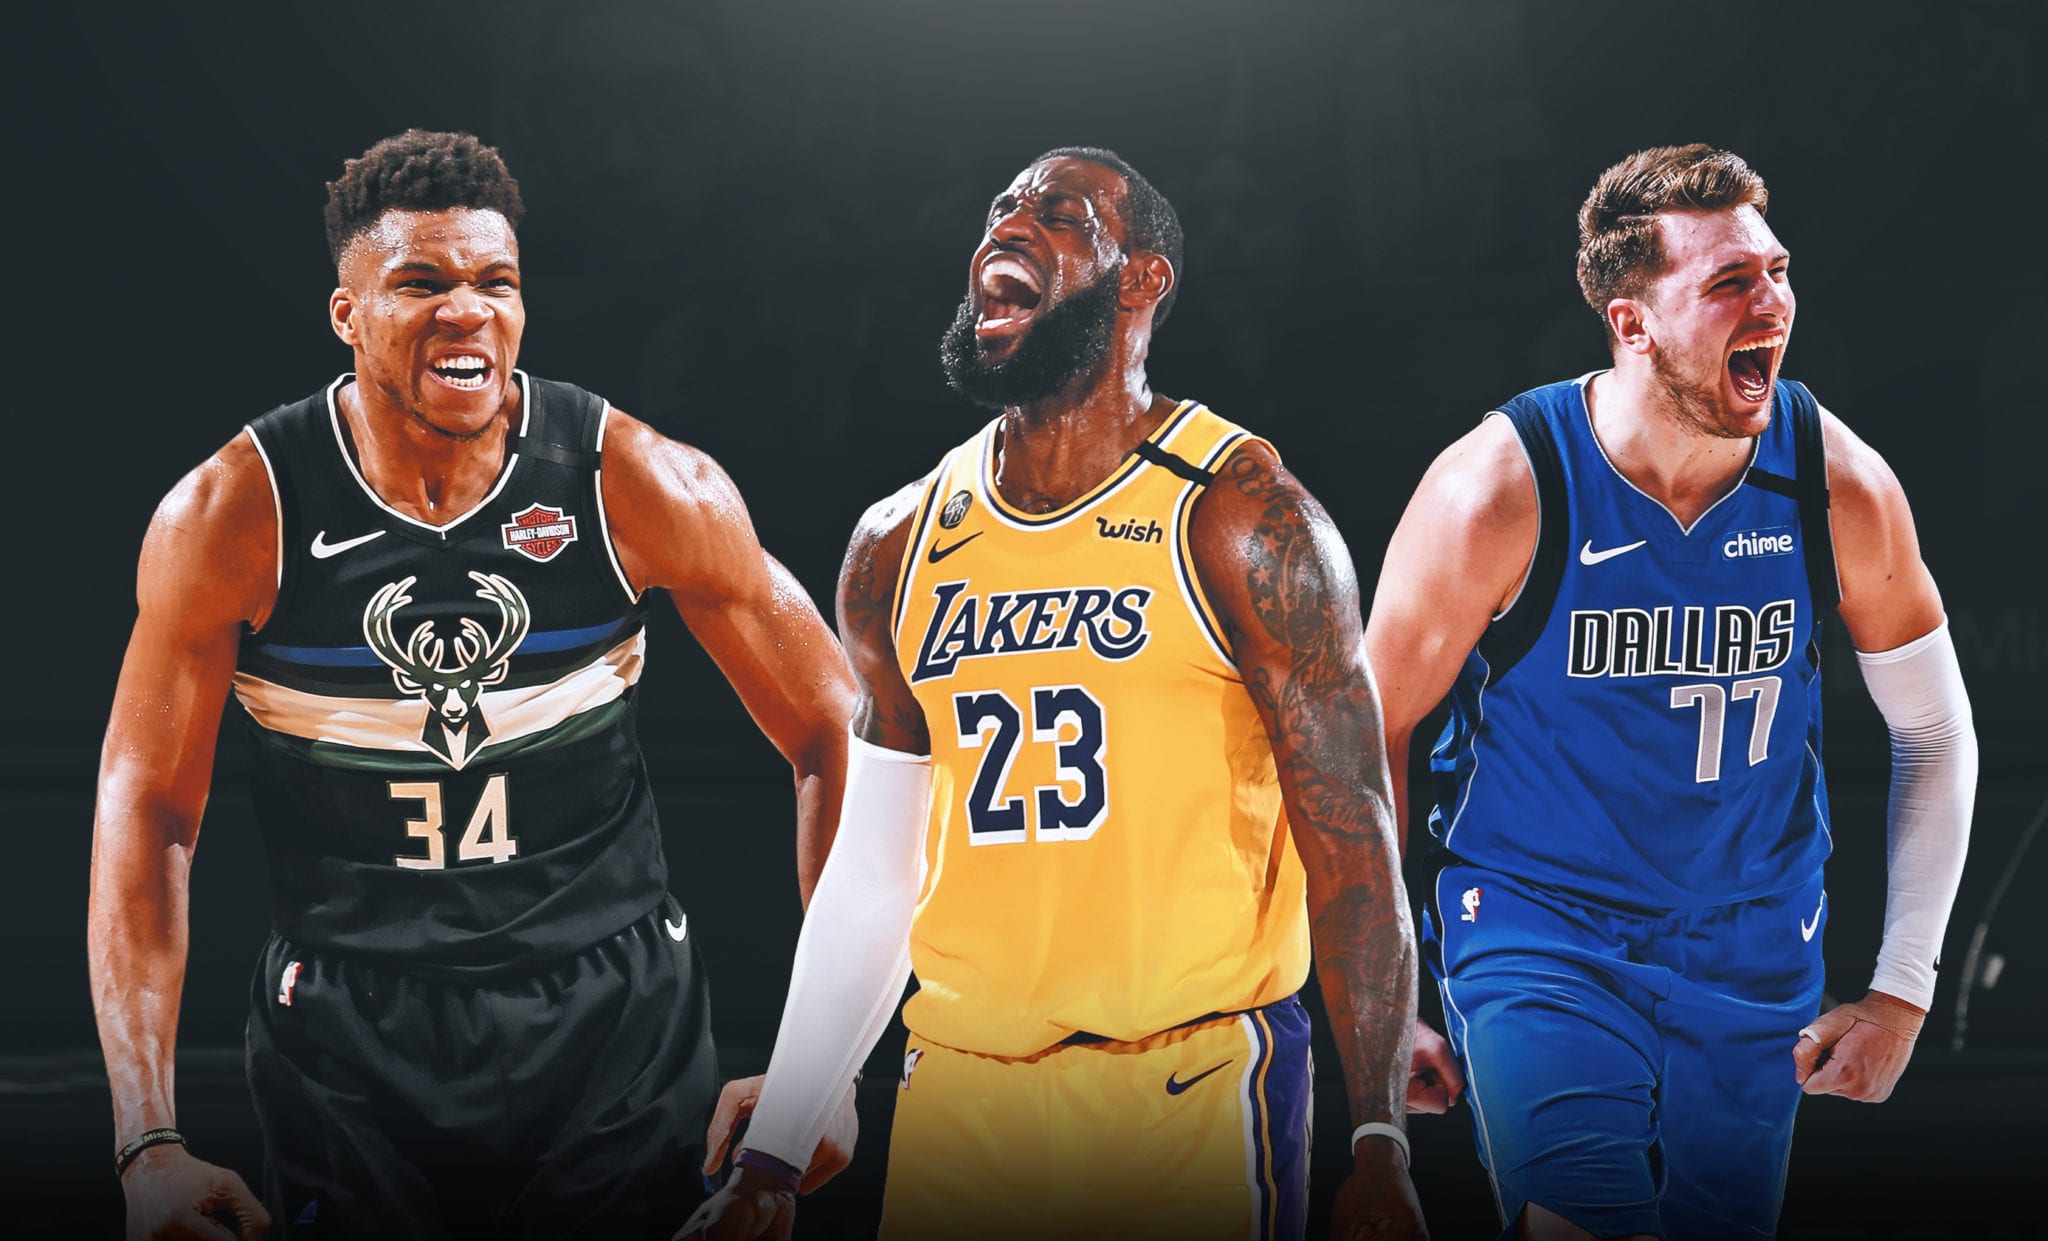 Ranking the Top 10 NBA Players (2020-21)